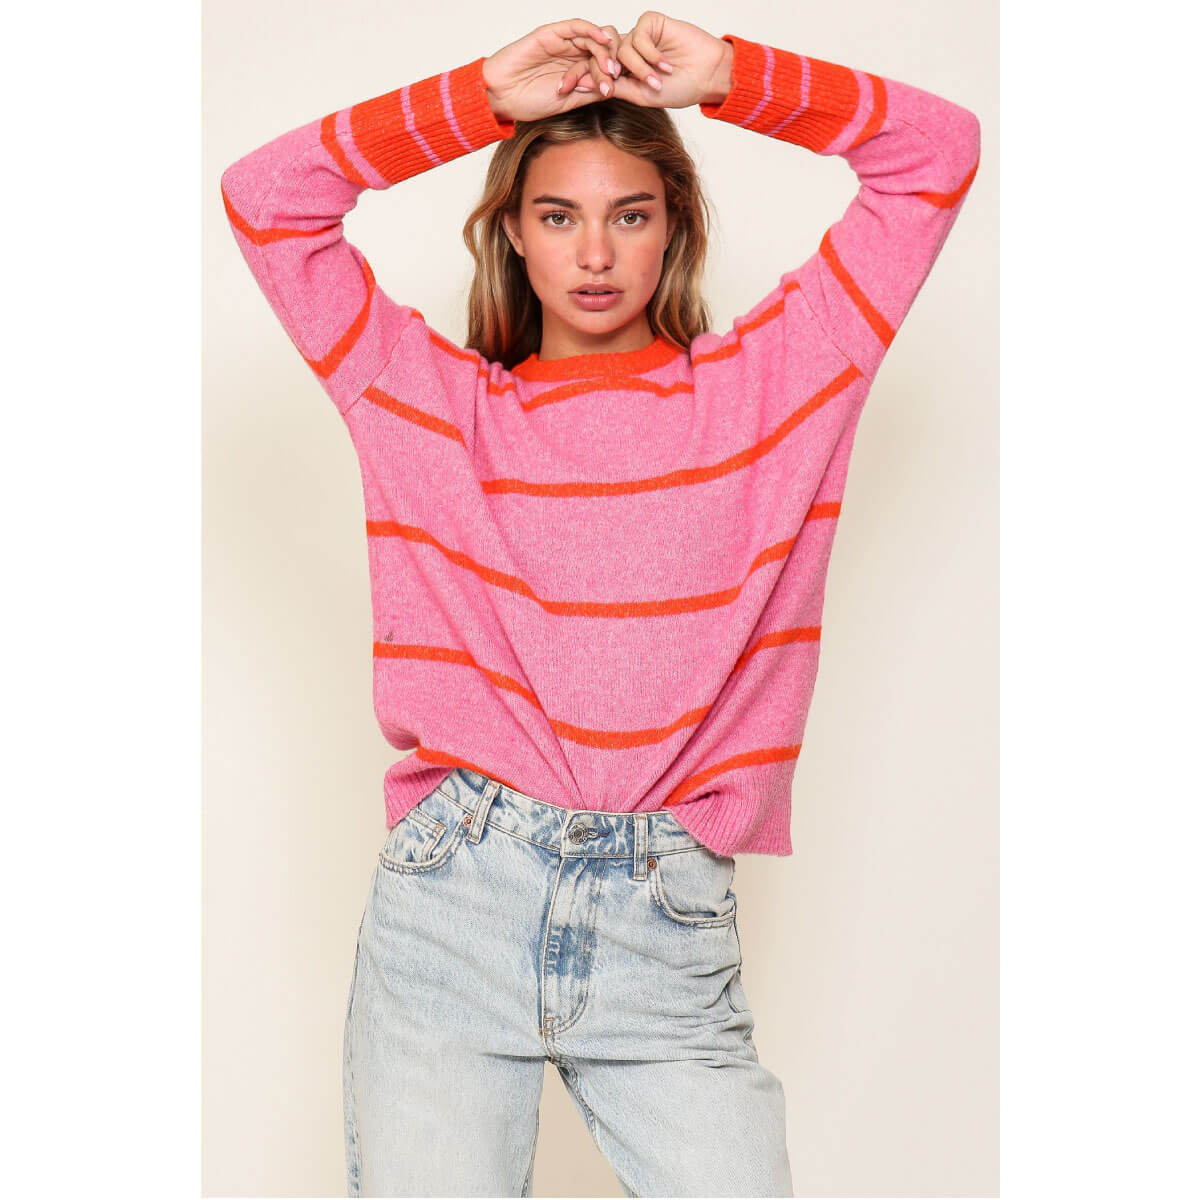 Striped Crew Neck Sweater pink front | MILK MONEY milkmoney.co | cute sweaters for women, cute knit sweaters, cute pullover sweaters